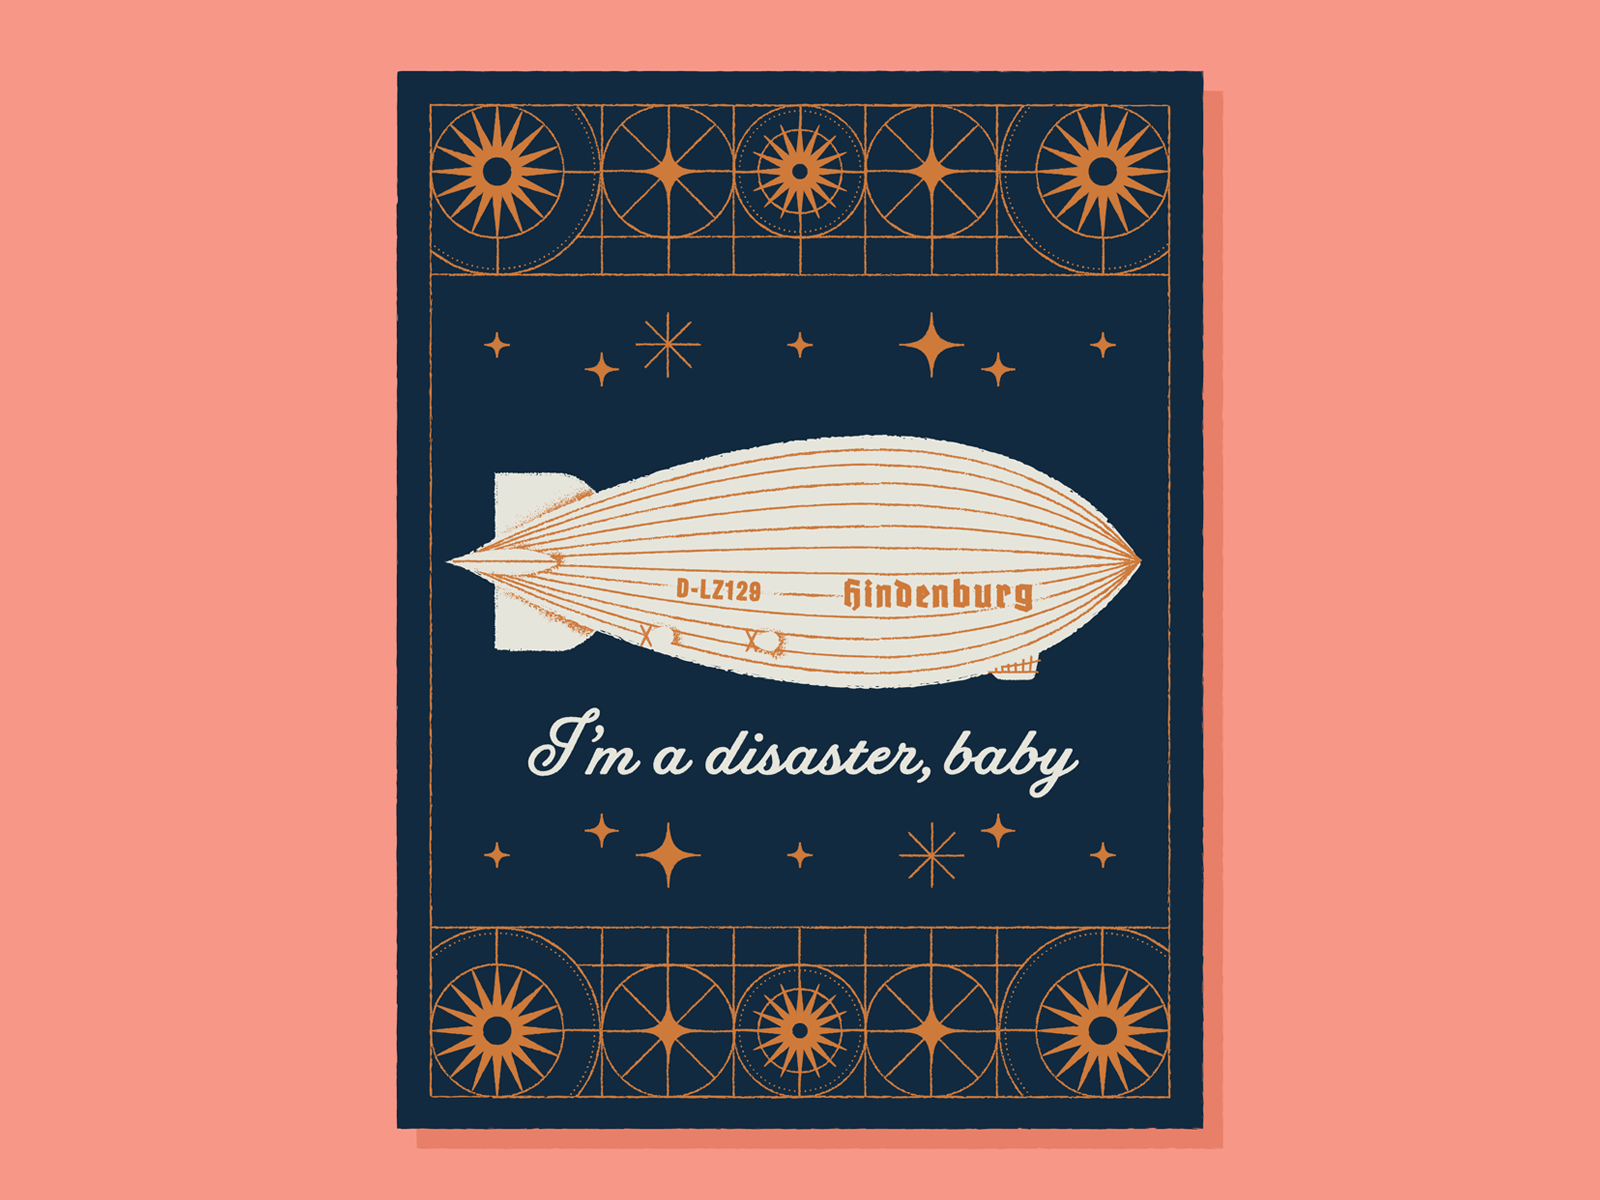 I'm a disaster, baby card disaster hindenburg illustration stars steampunk typography